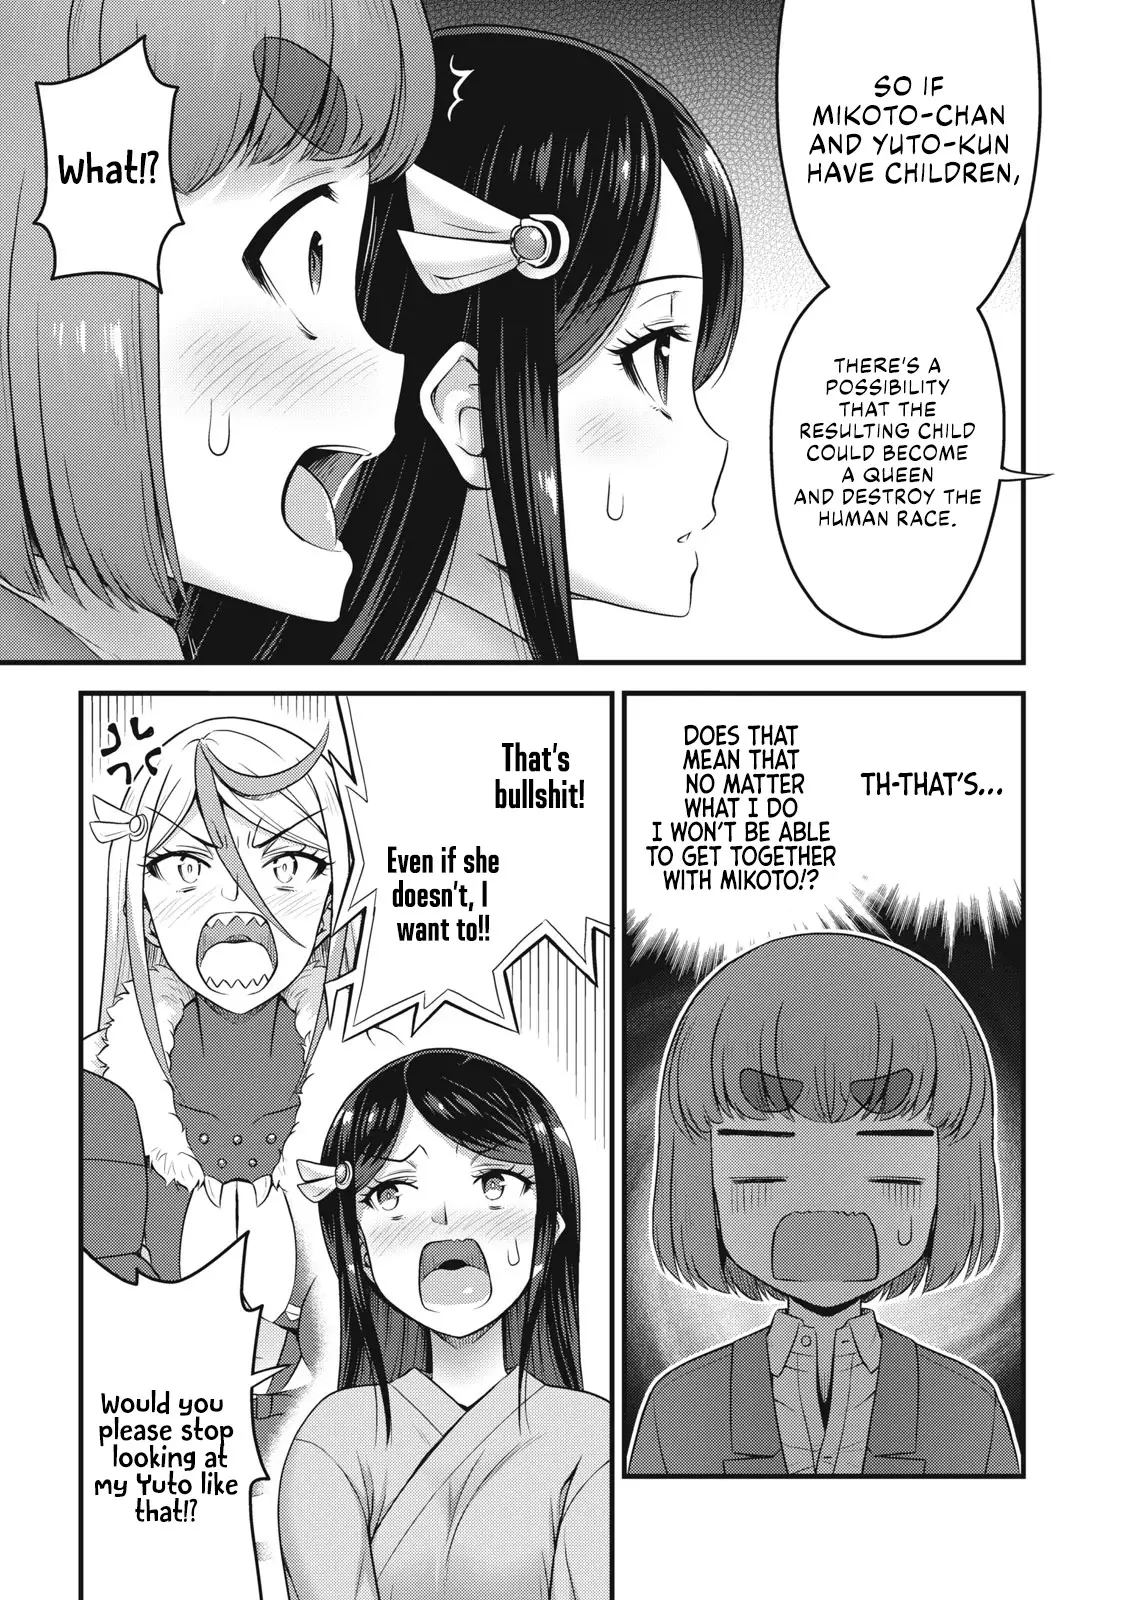 Queen's Seed - 5 page 16-6551daba